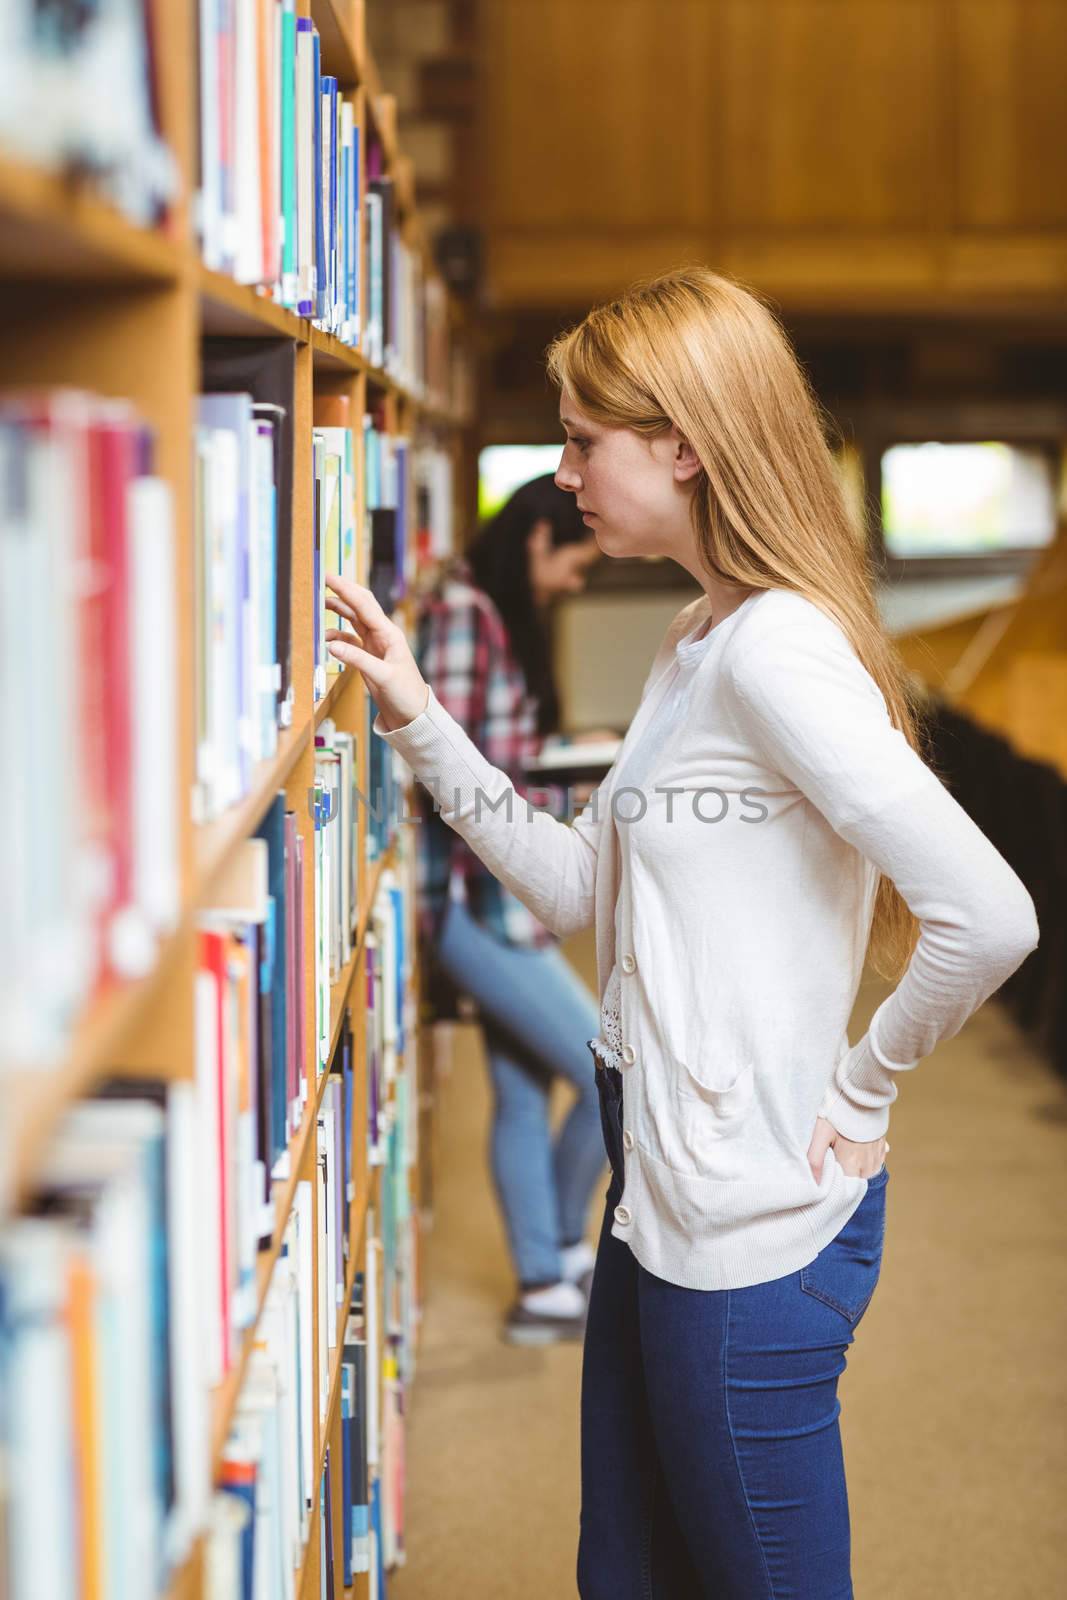 Blond student looking for book in library shelves by Wavebreakmedia